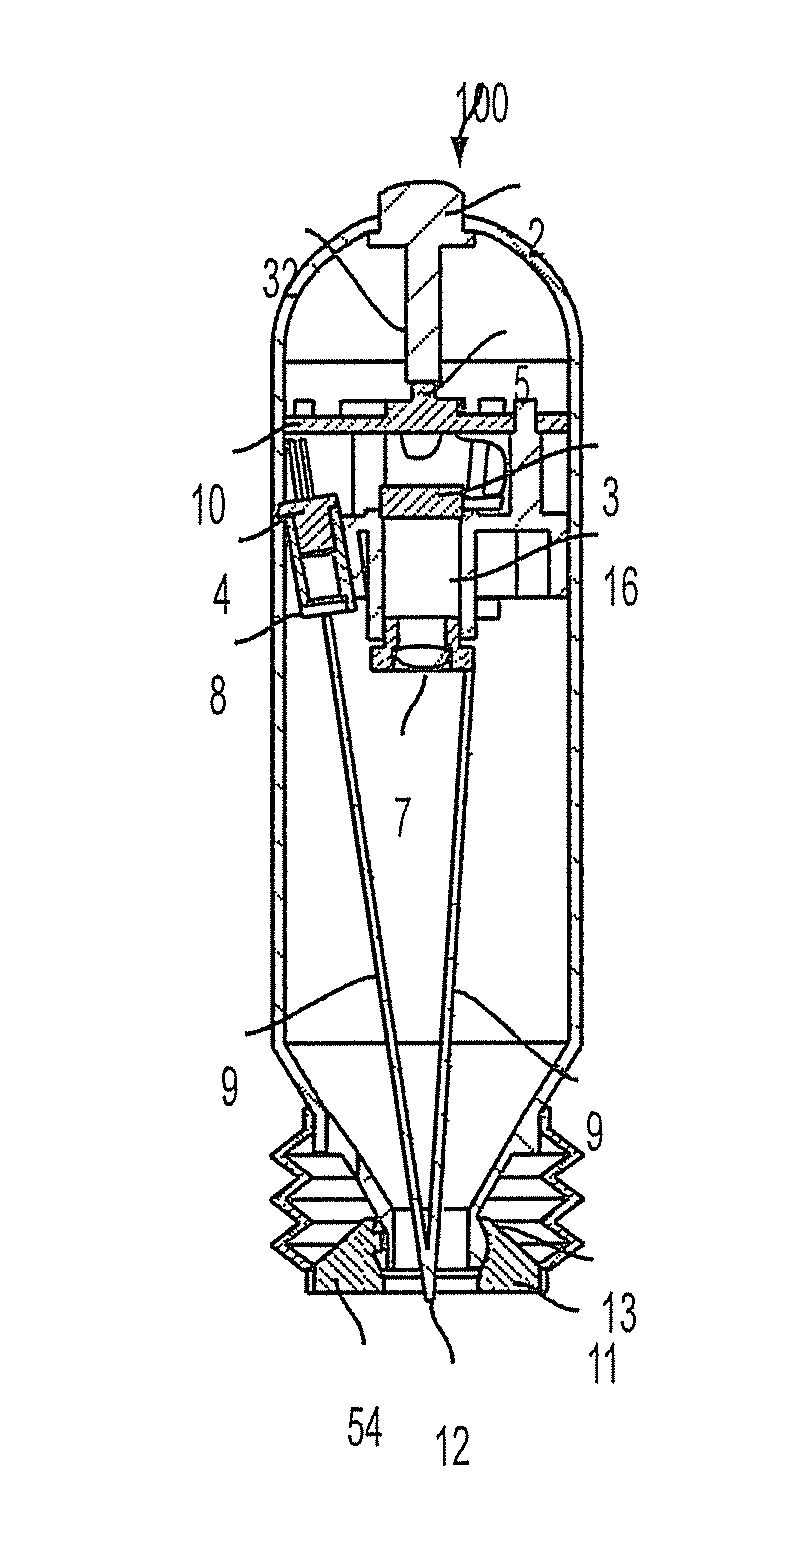 Aesthetic treatment device and method